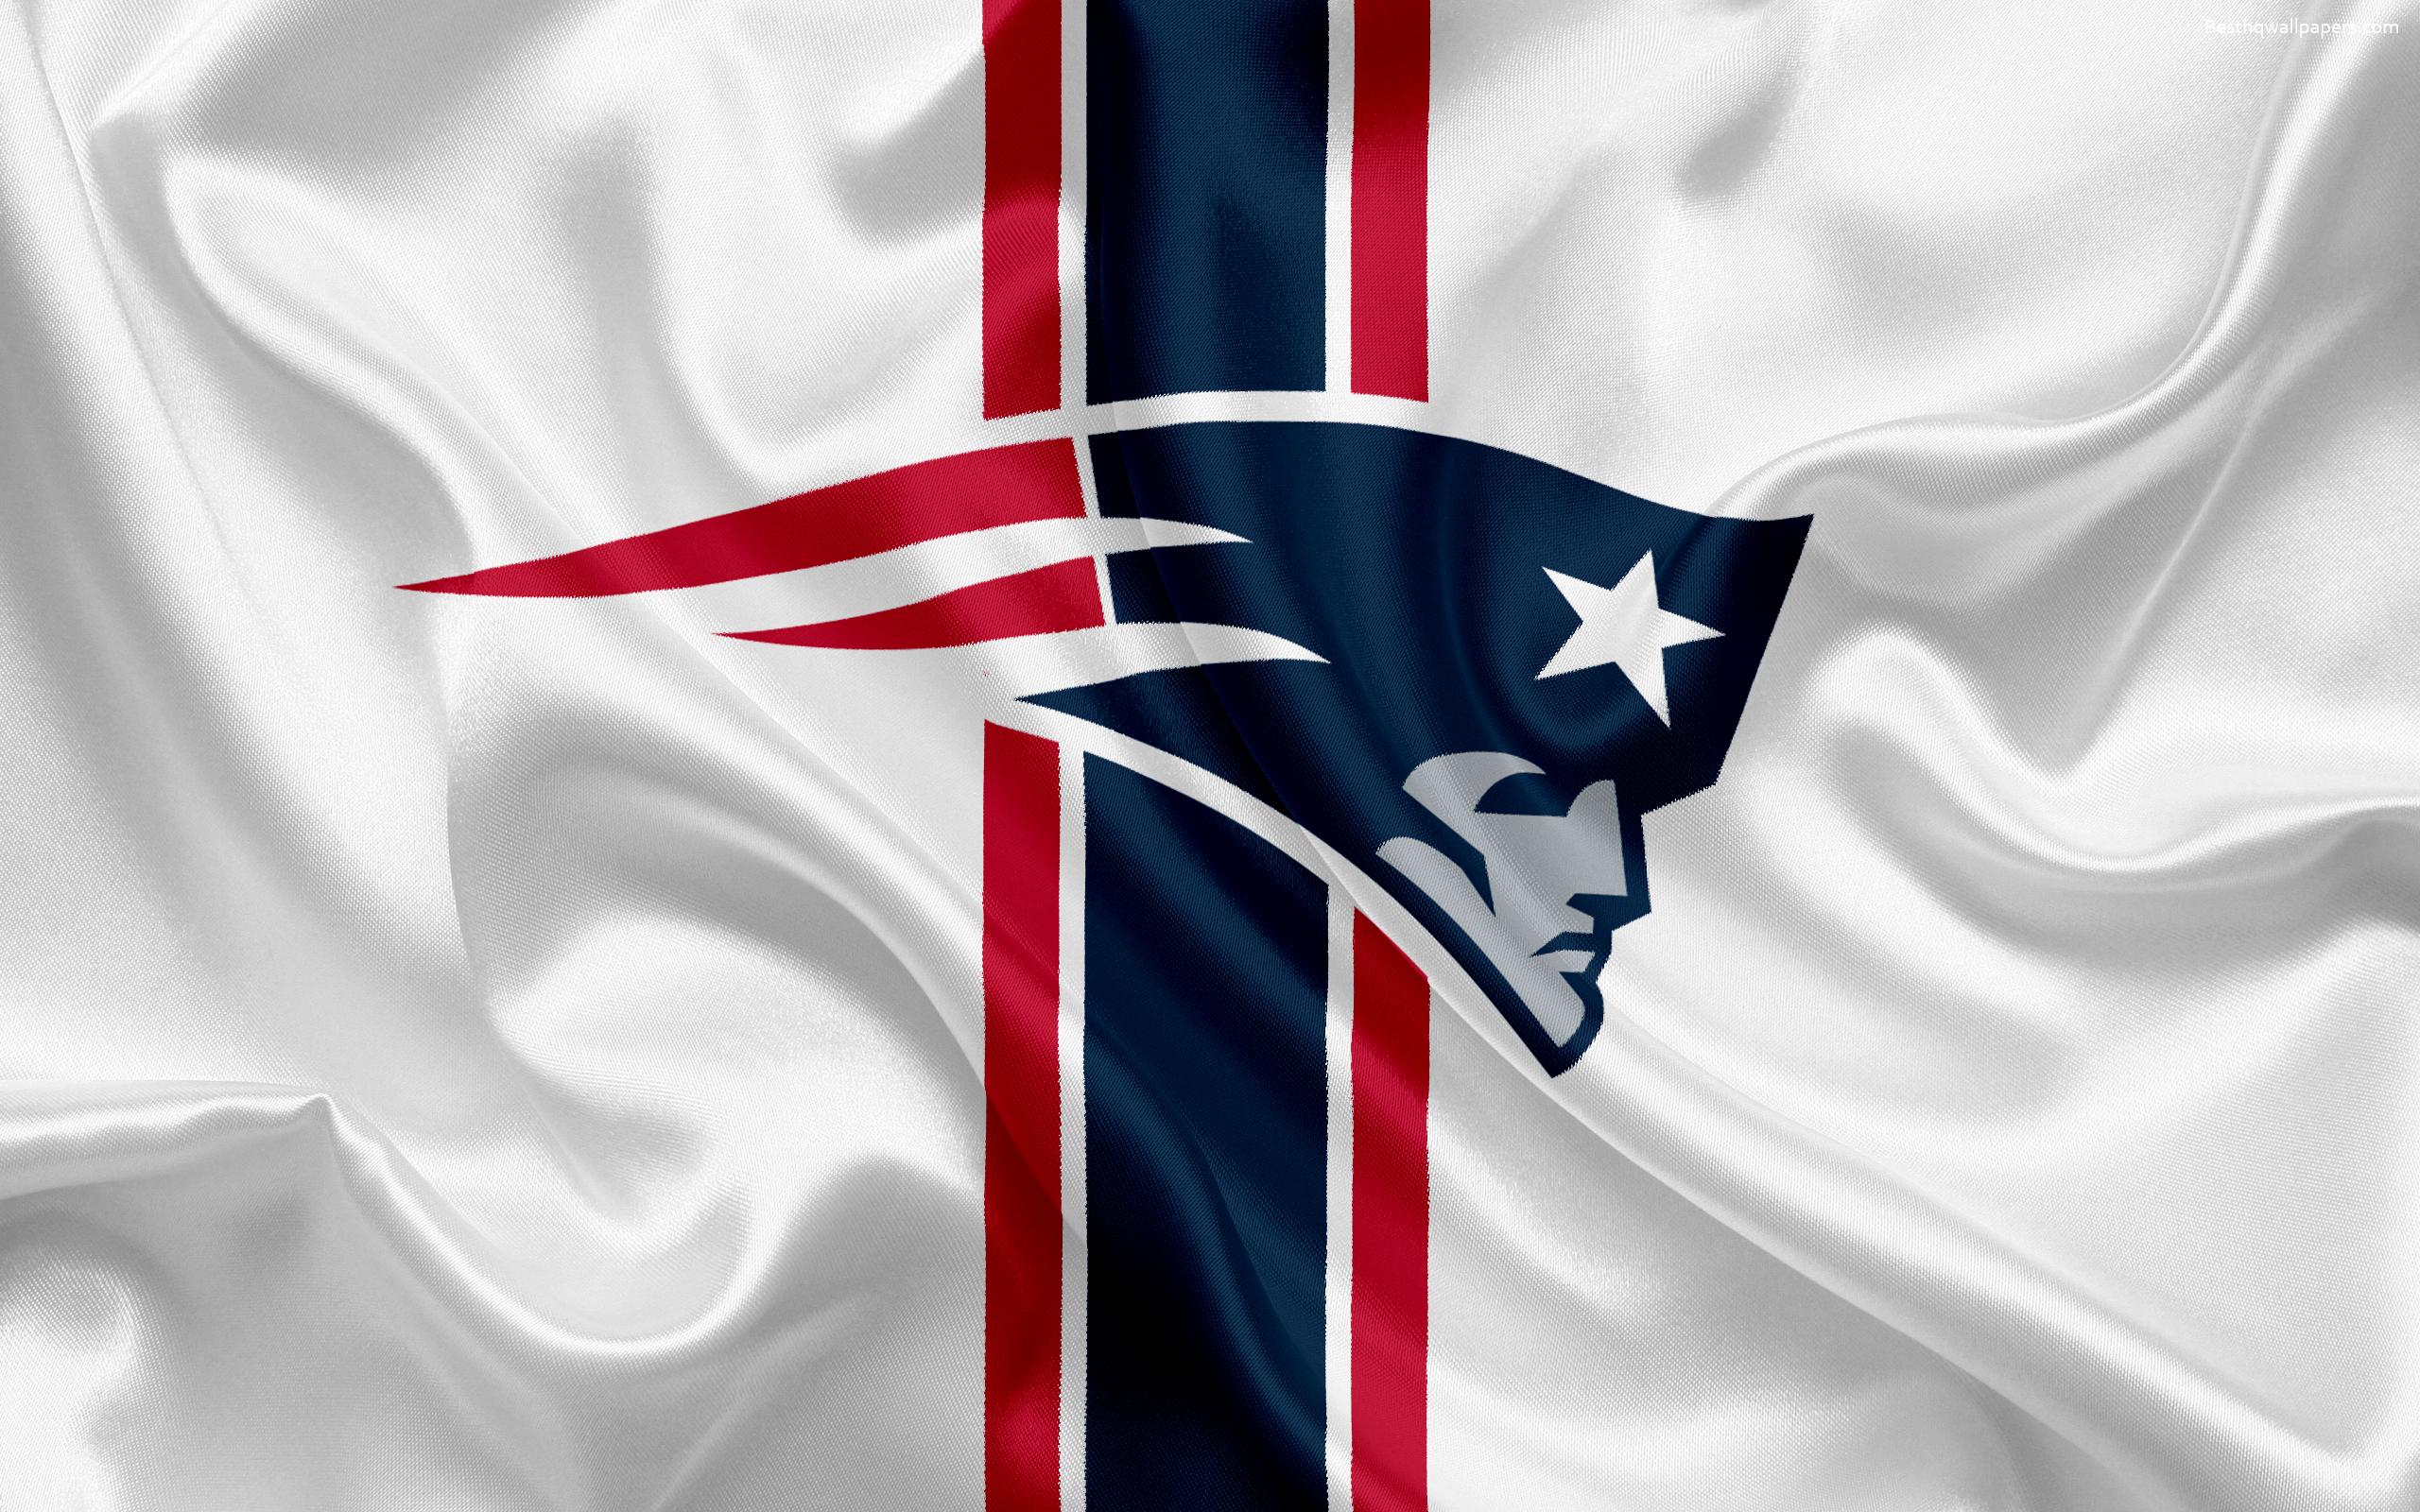 Download wallpaper New England Patriots, American football, logo, emblem, National Football League, NFL, New England, USA for desktop with resolution 2560x1600. High Quality HD picture wallpaper